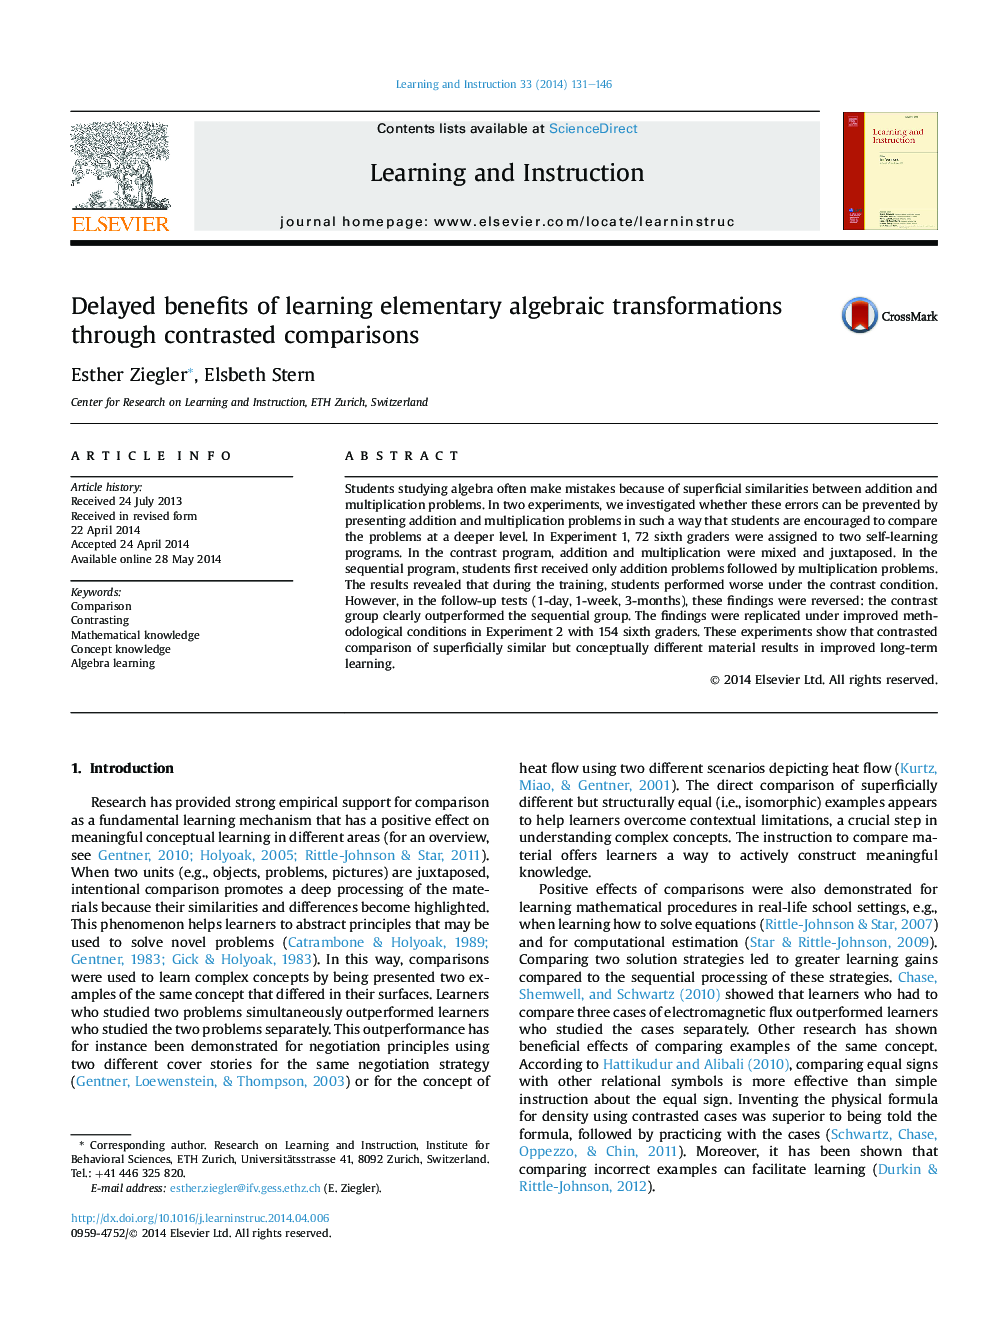 Delayed benefits of learning elementary algebraic transformations through contrasted comparisons